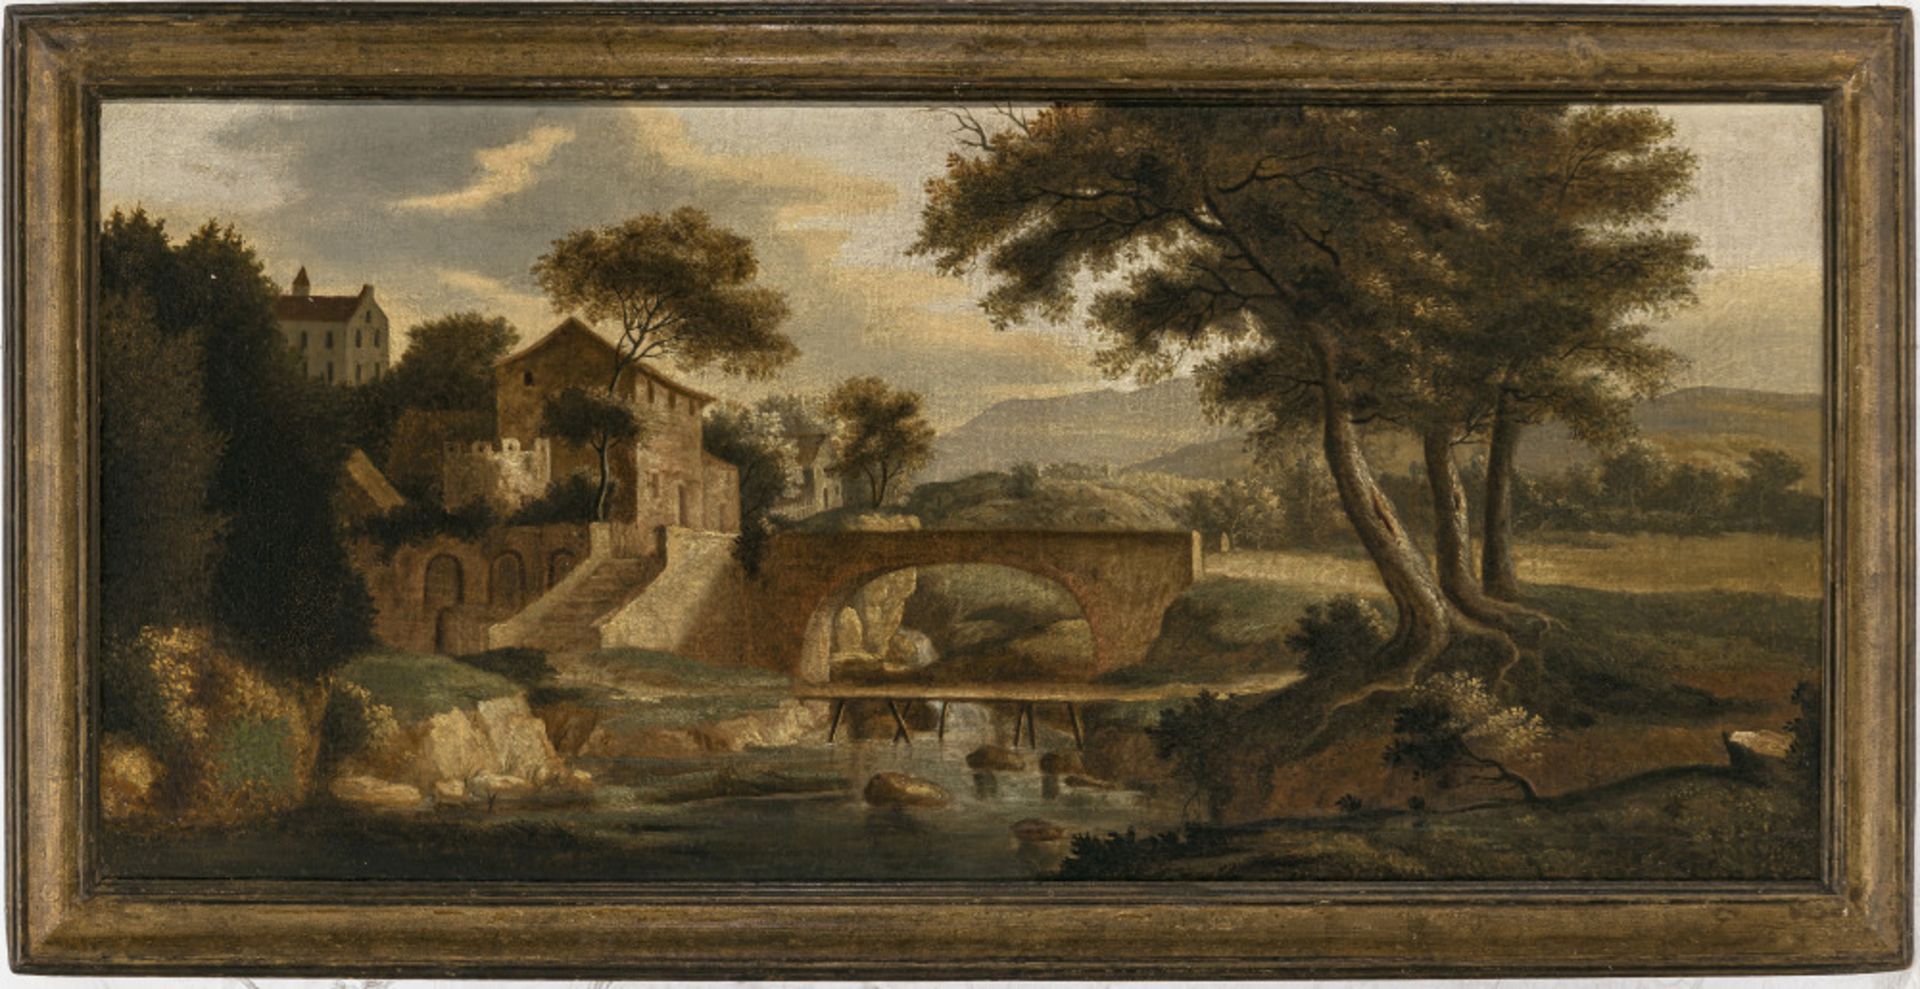 Deutsch Early 18th century - Landscapes - Image 5 of 5